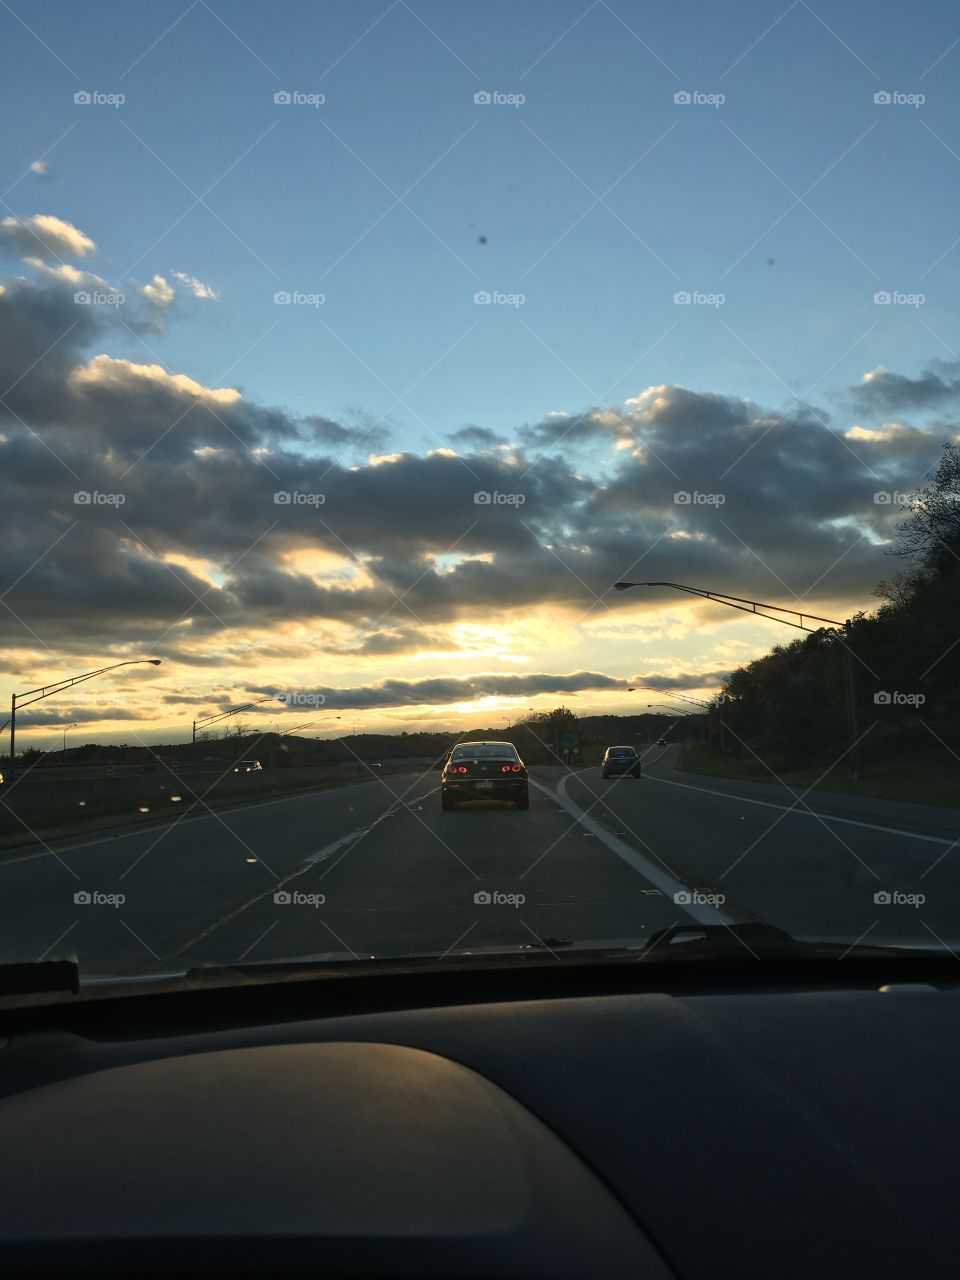 Sunset over highway 